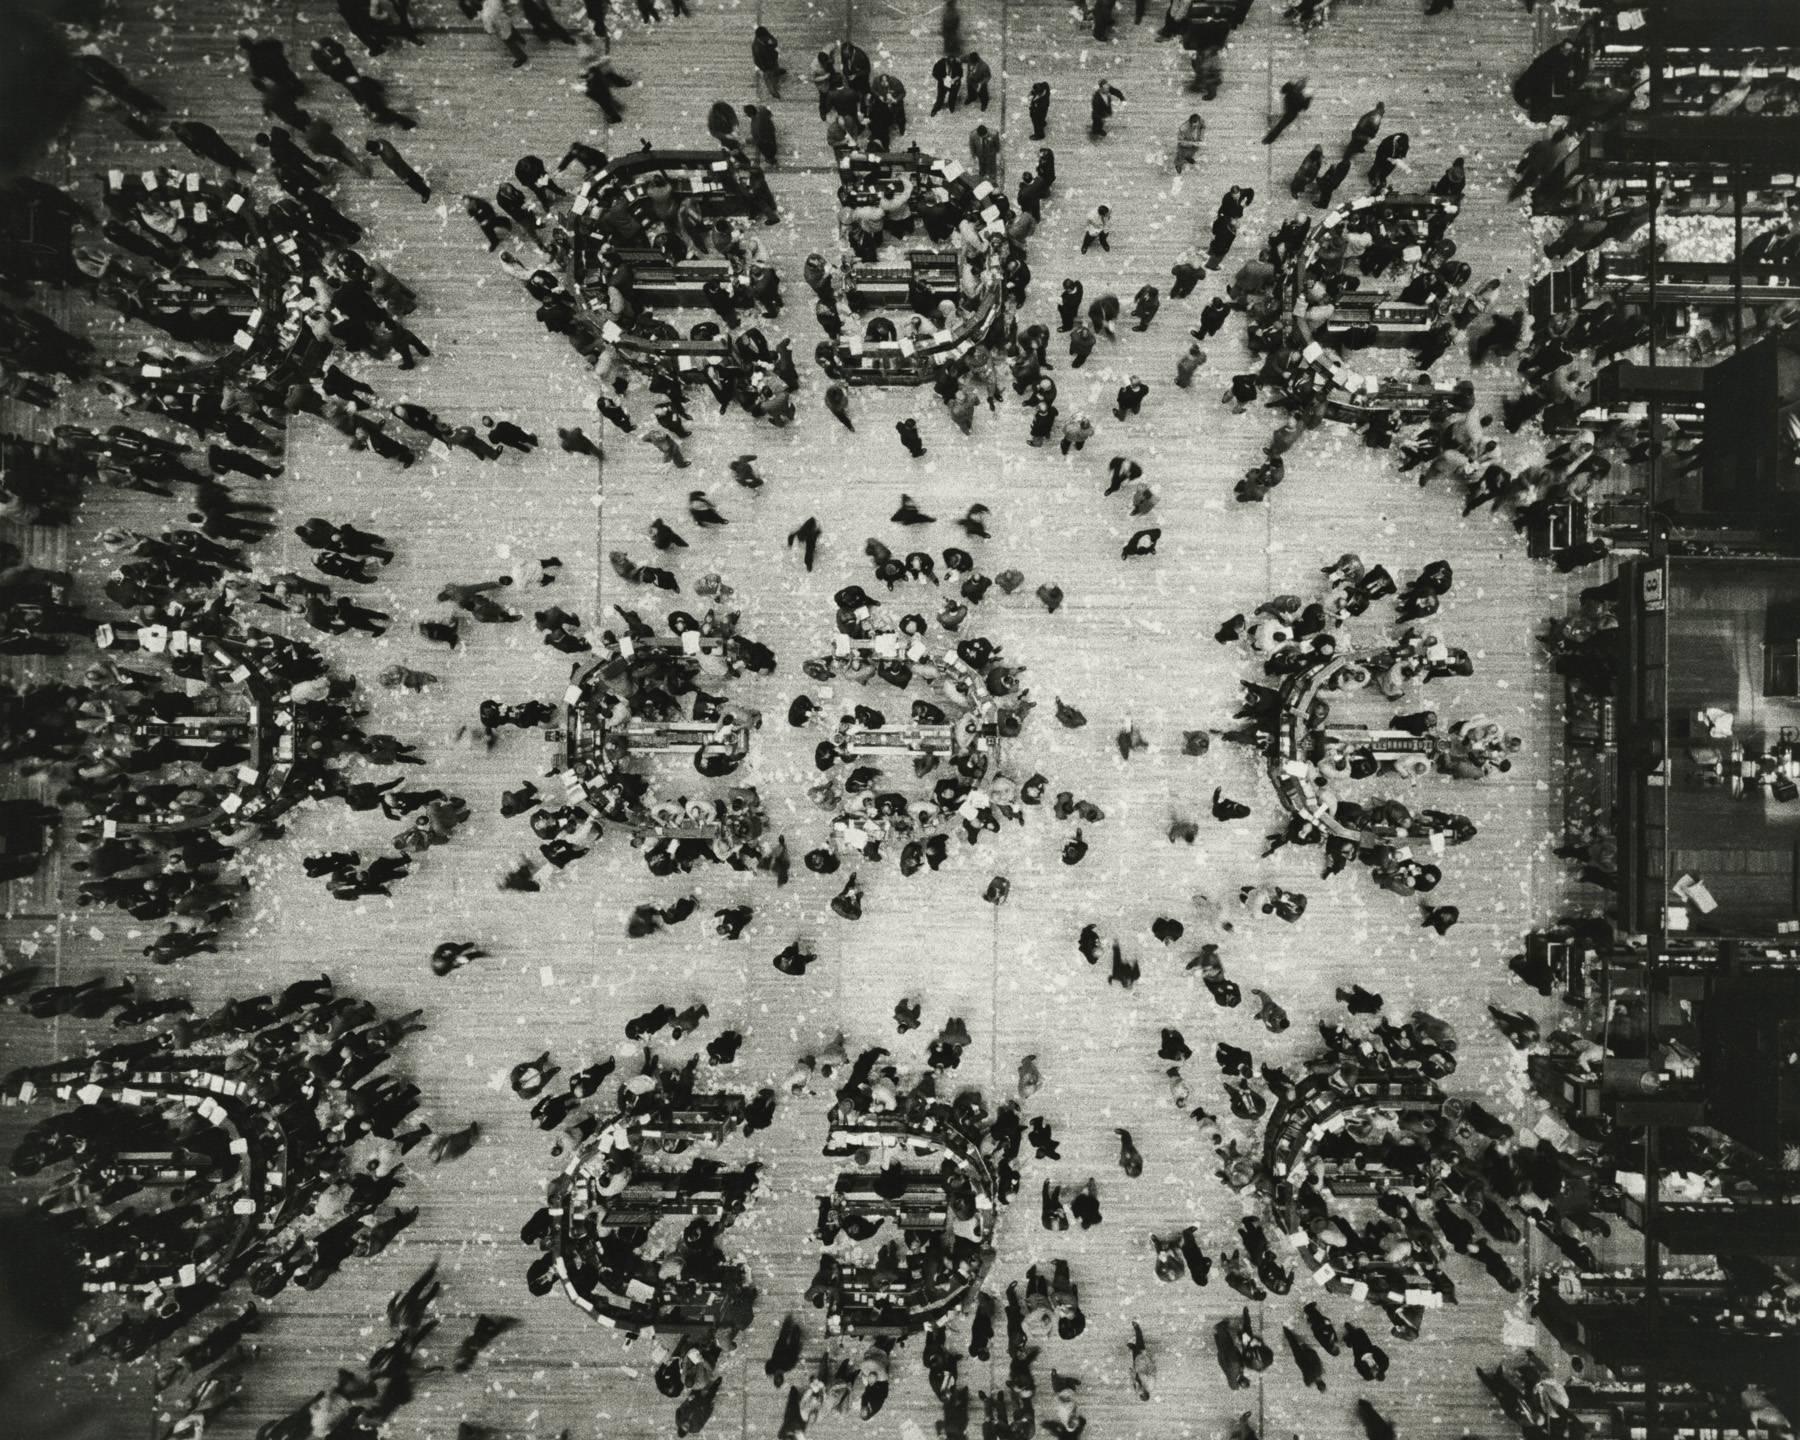 Marvin Newman Black and White Photograph - Bird's Eye View, New York Stock Exchange